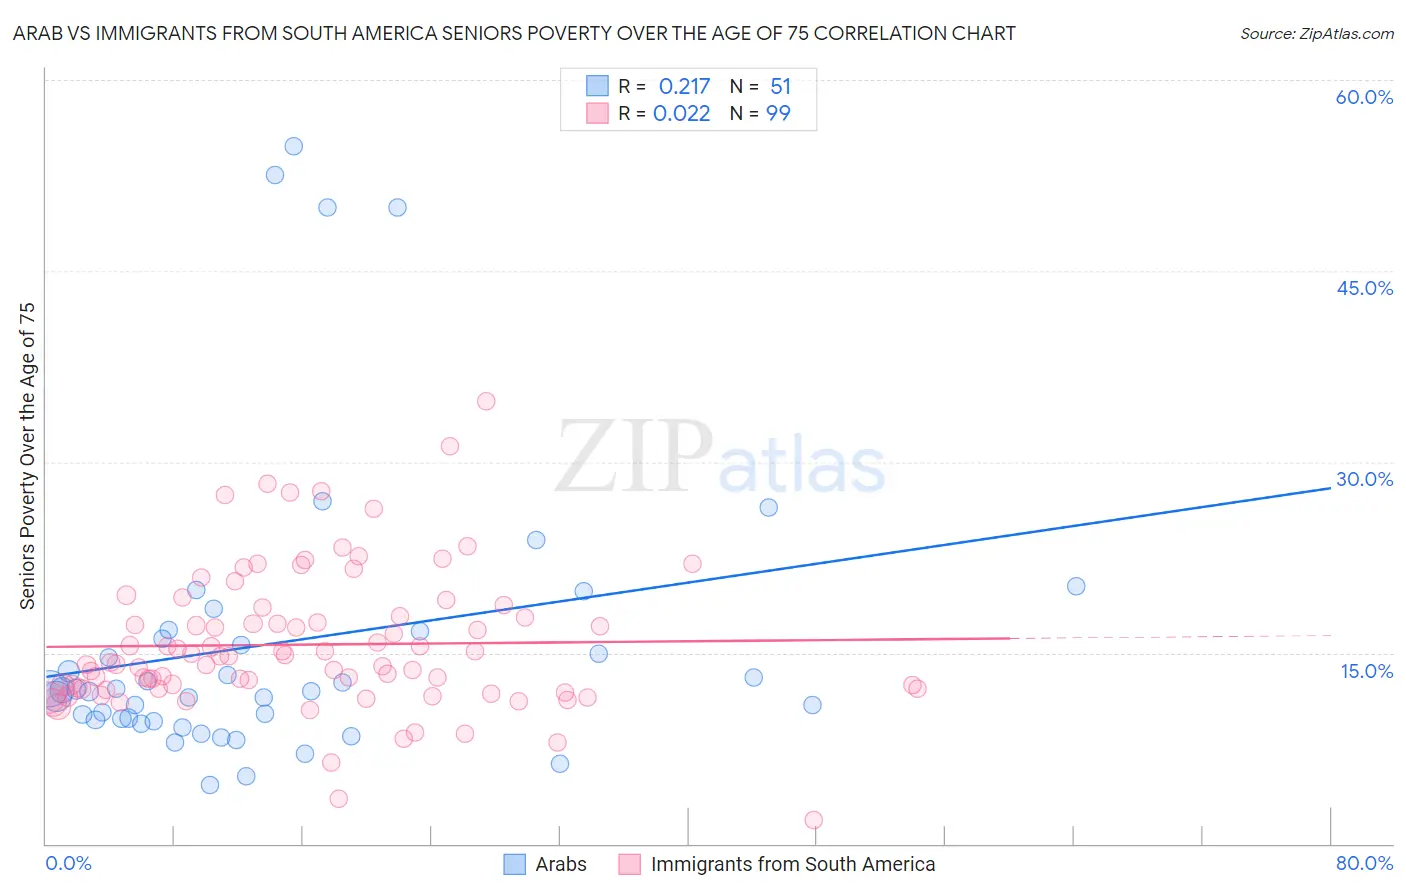 Arab vs Immigrants from South America Seniors Poverty Over the Age of 75